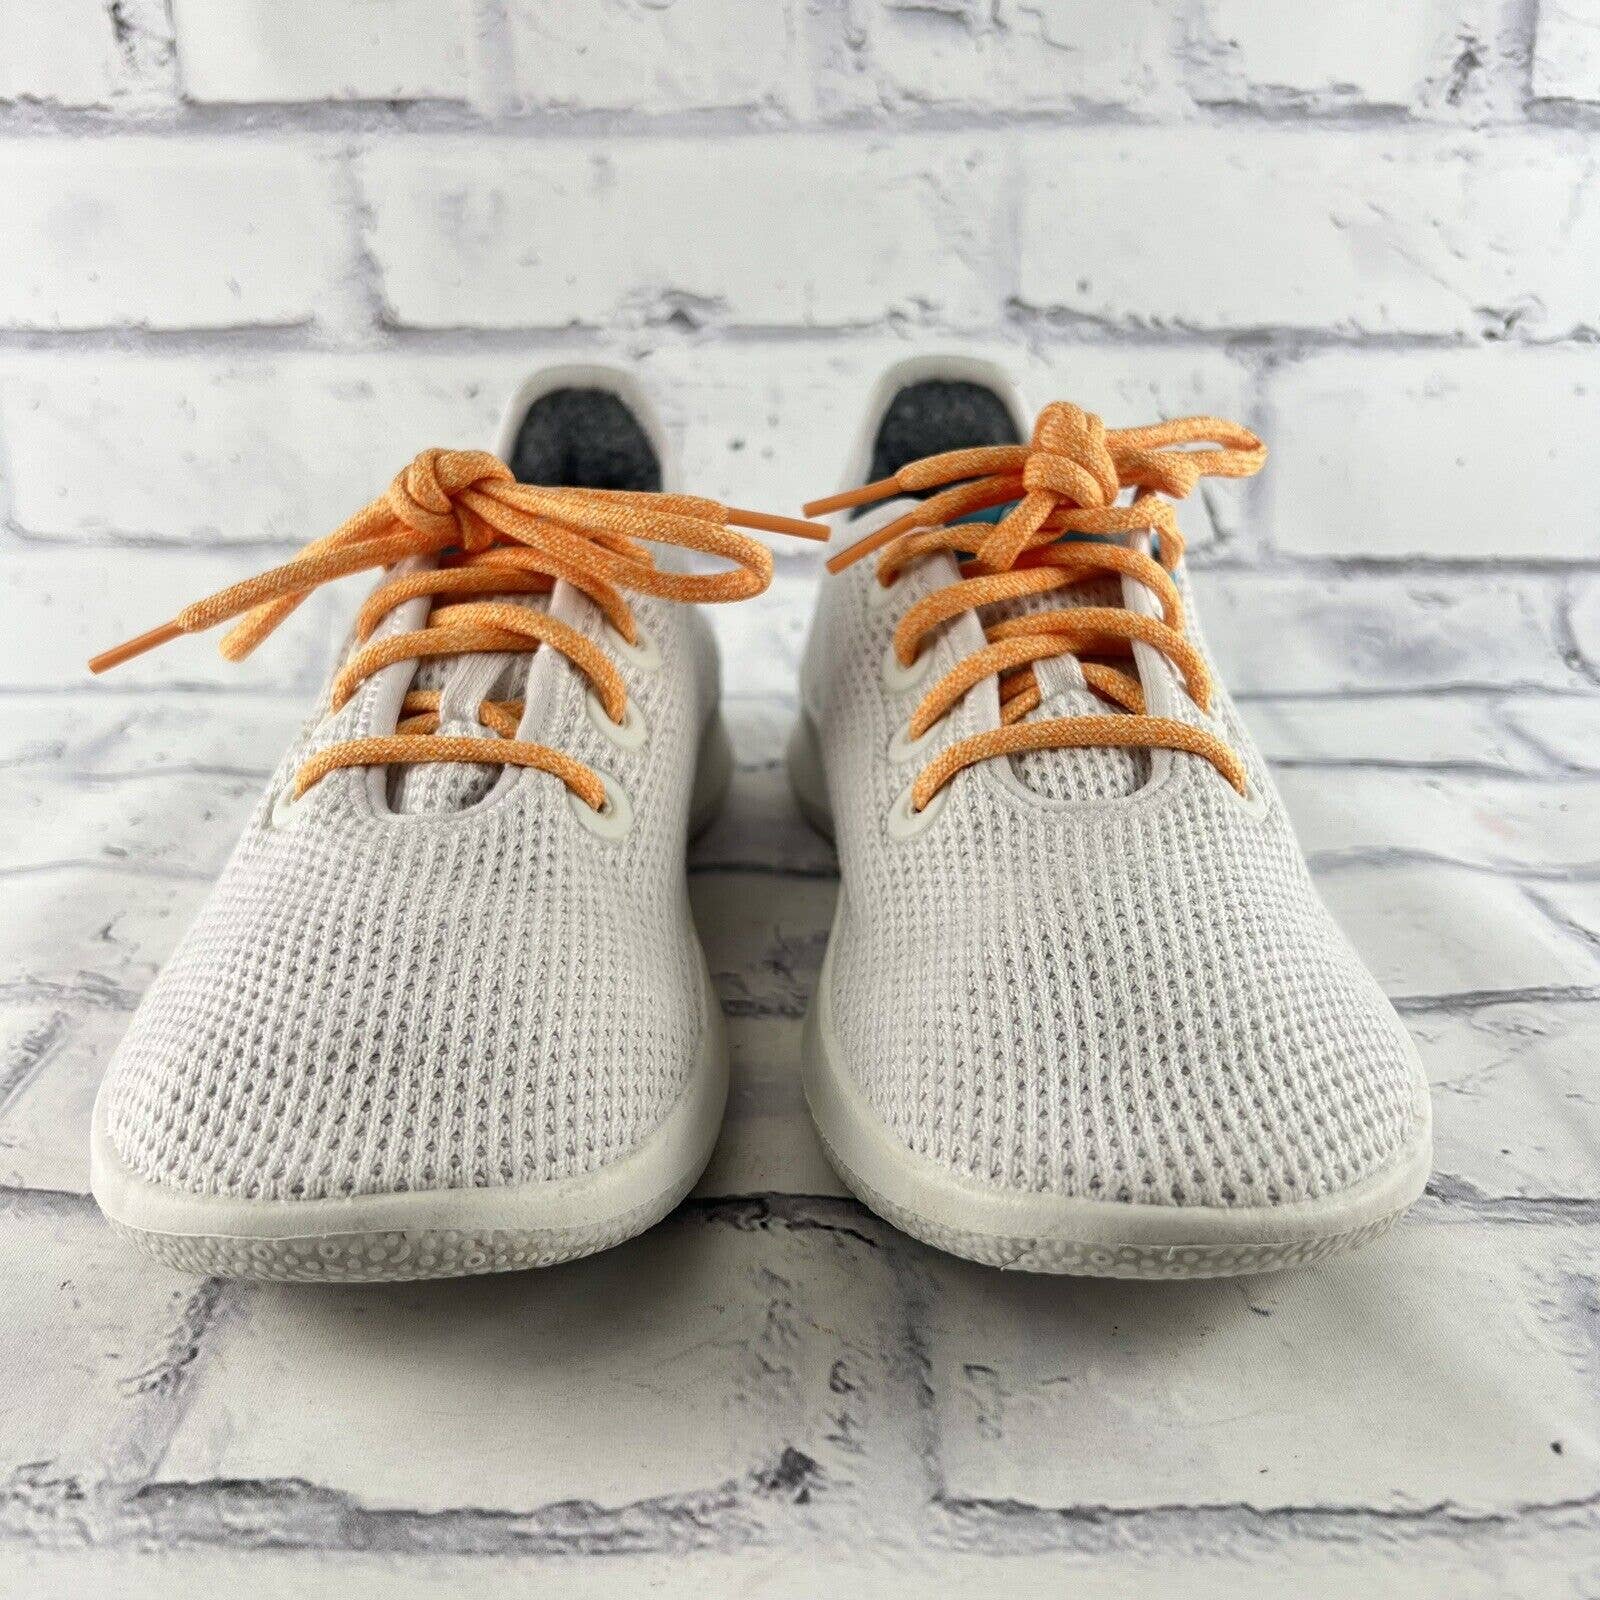 Allbirds Tree Runners Running Shoes Women's 9 White Sneakers Orange Laces